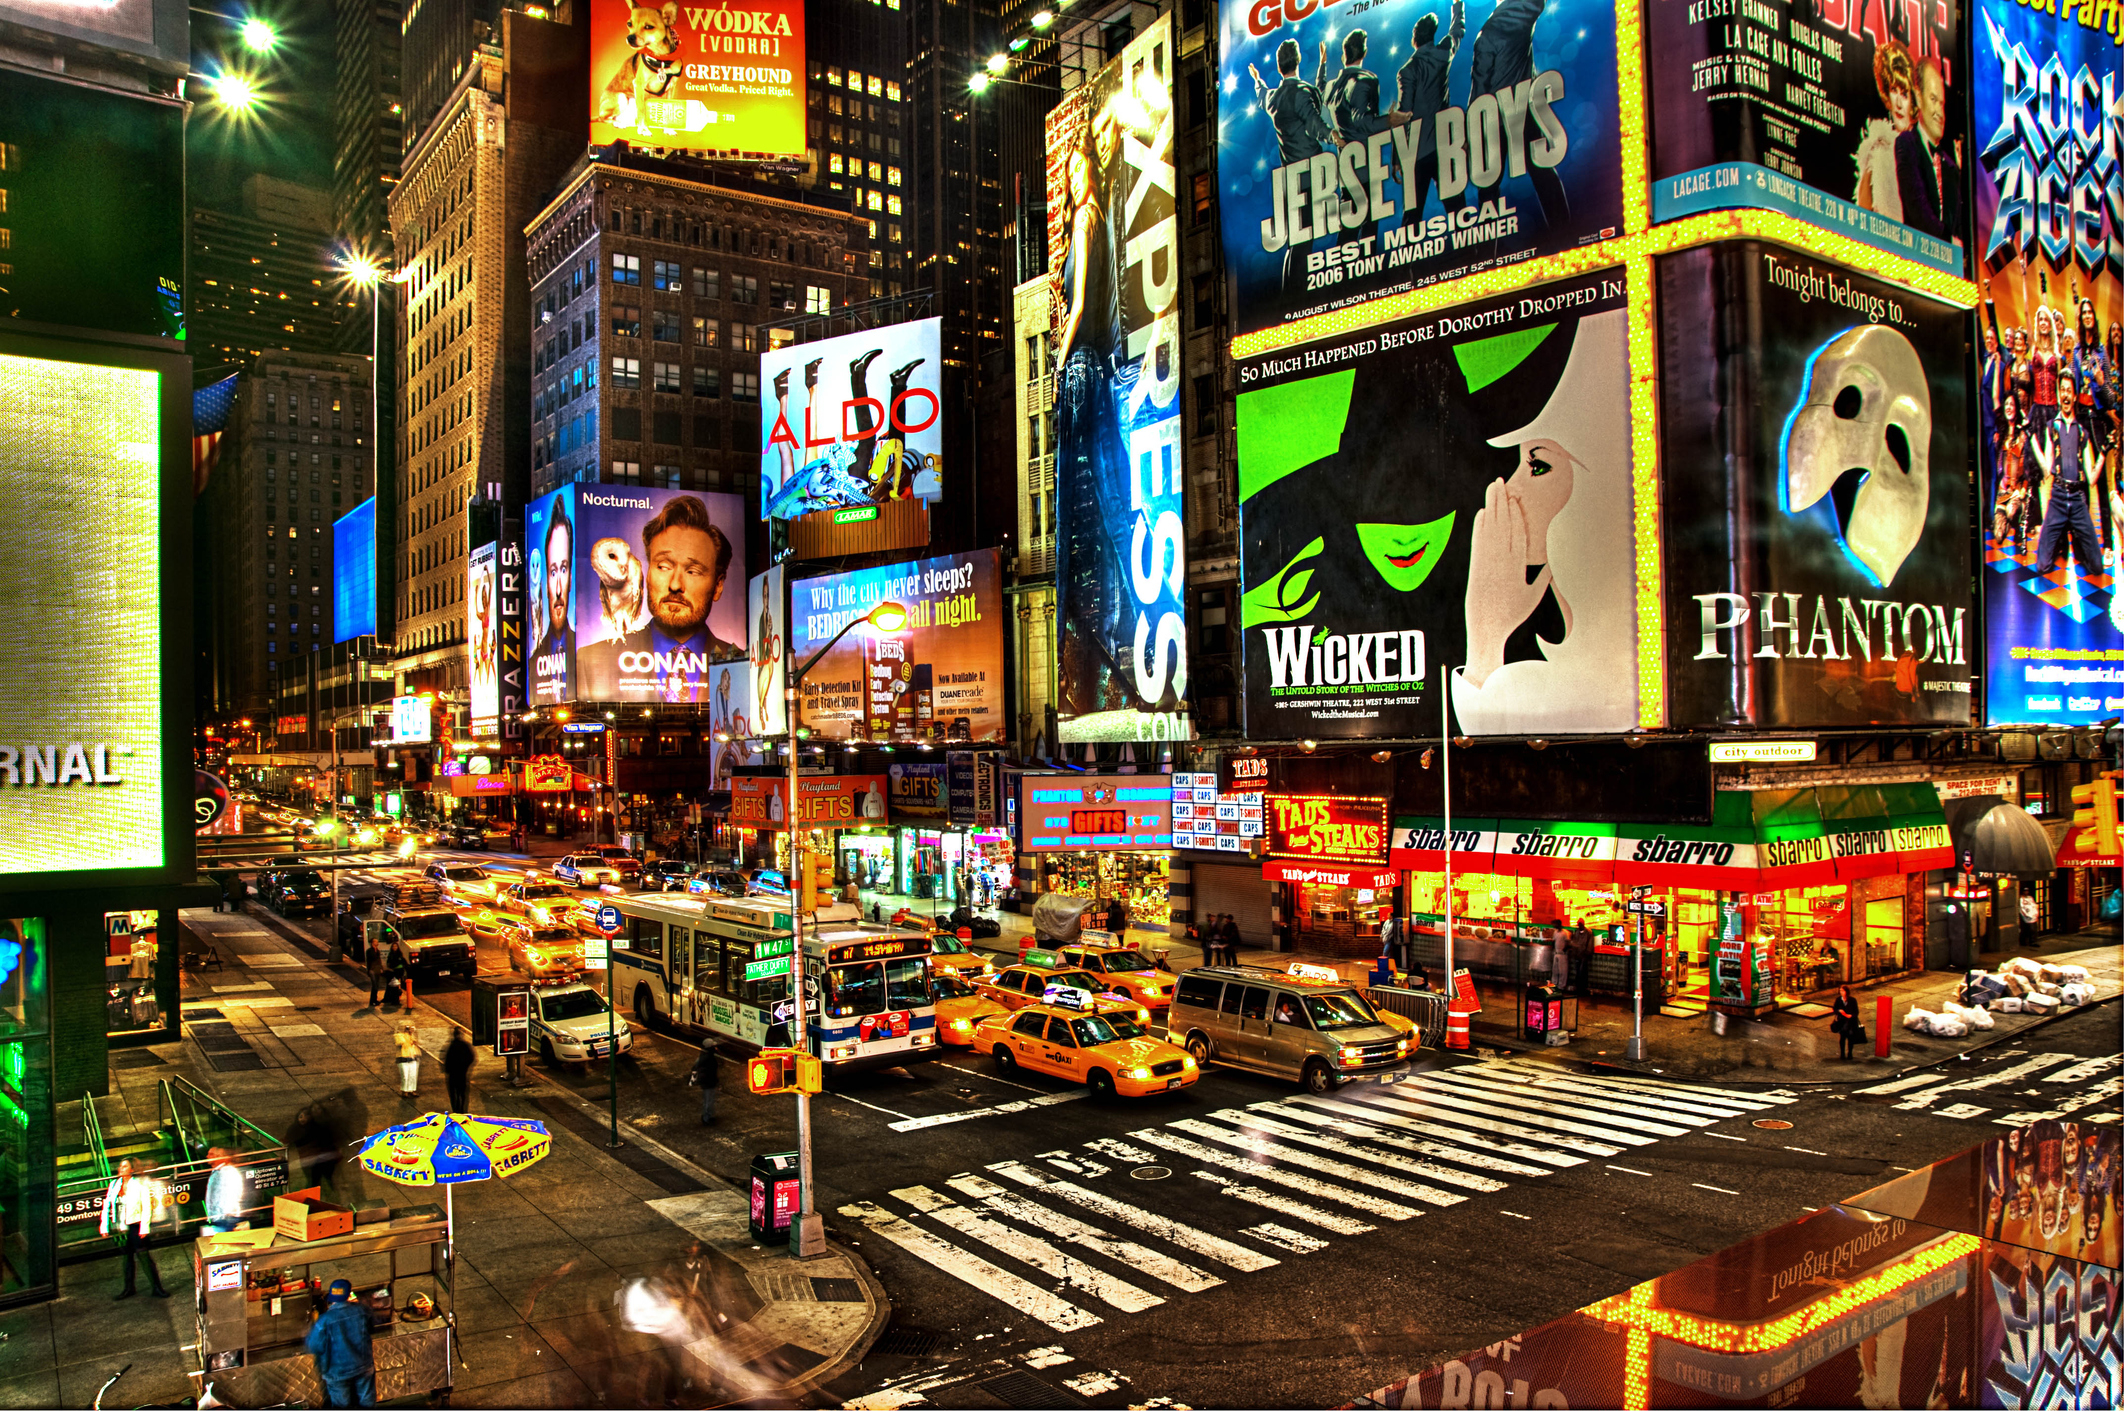 Billboards at night in Times Square